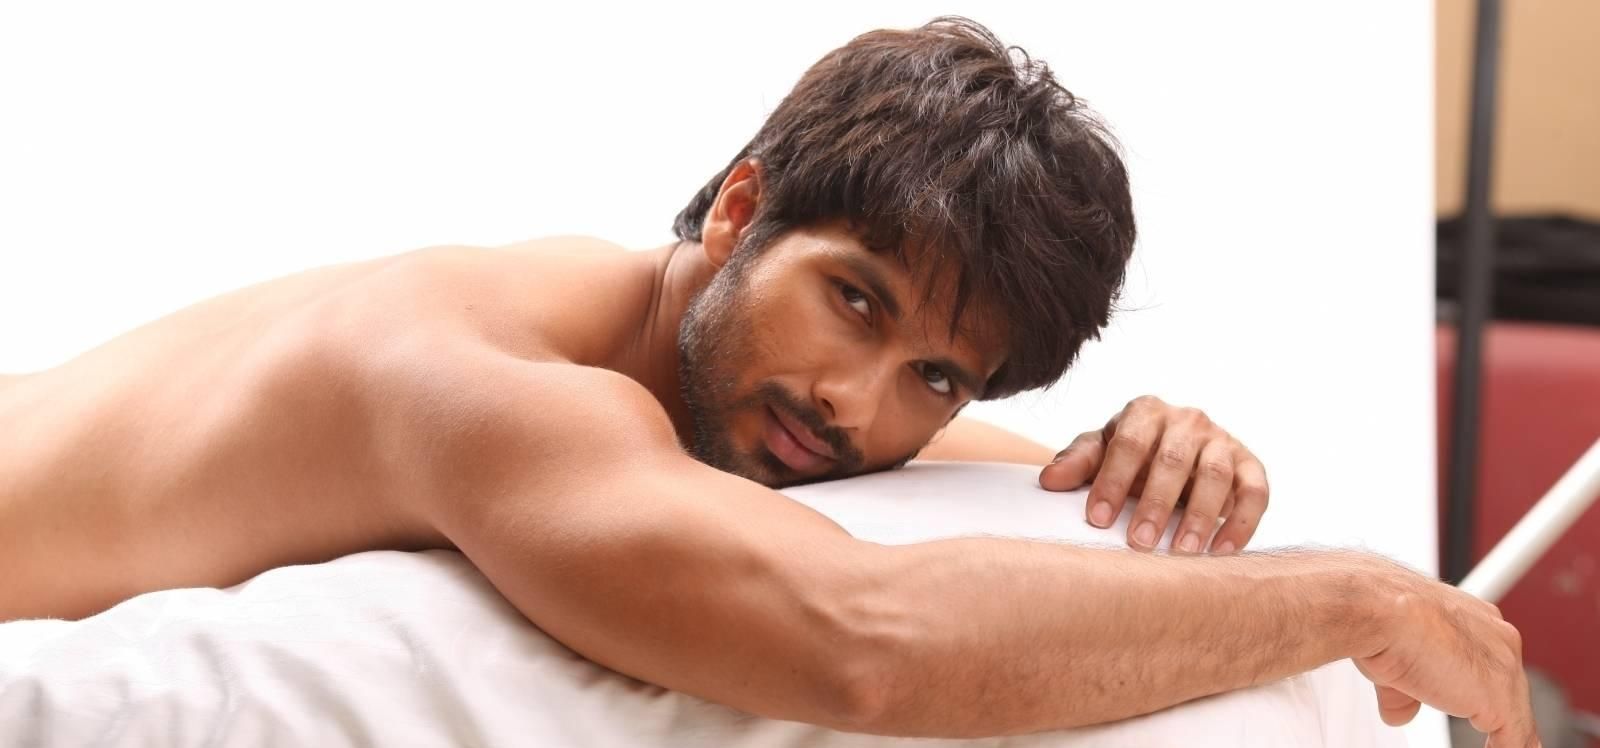 Shahid Kapoor Hot Images 5